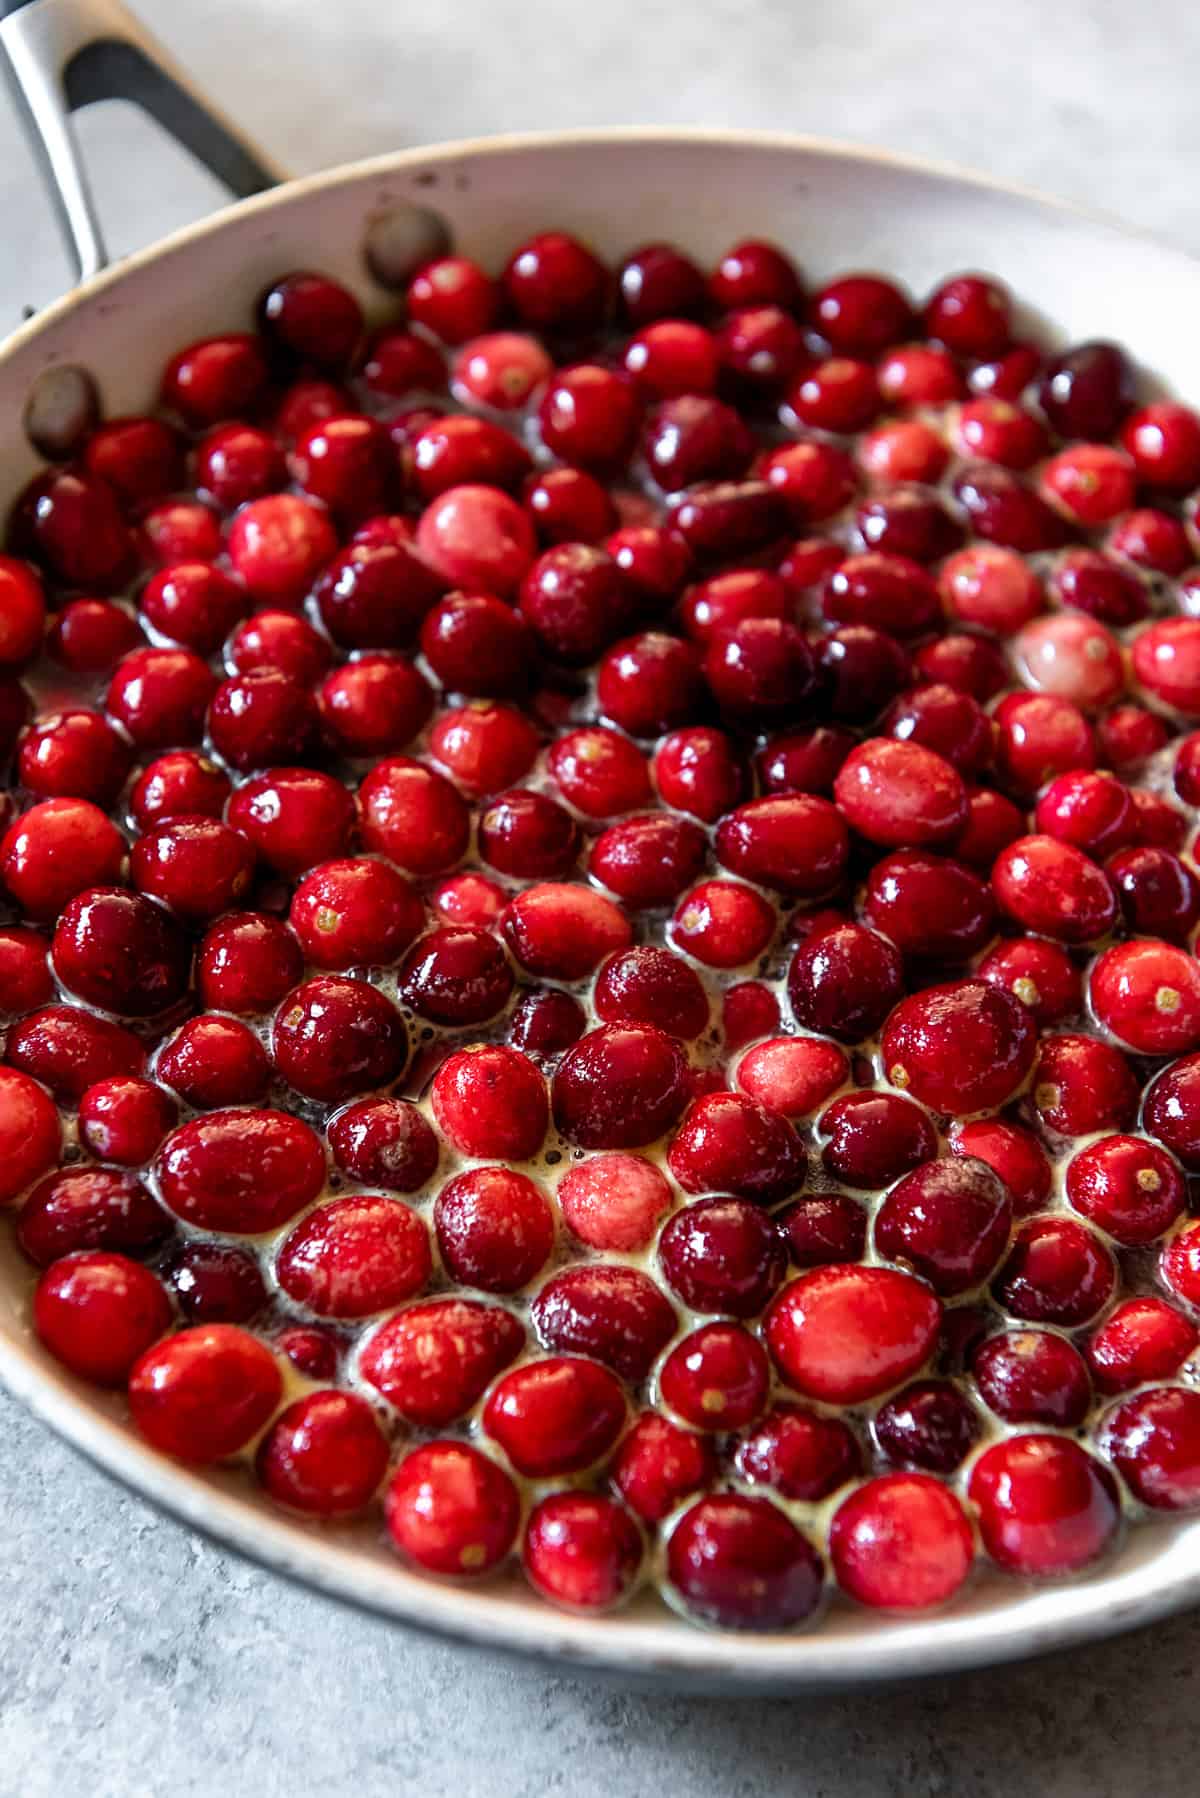 Top view of a pan filled with fresh cranberries in water, orange juice and sugar.